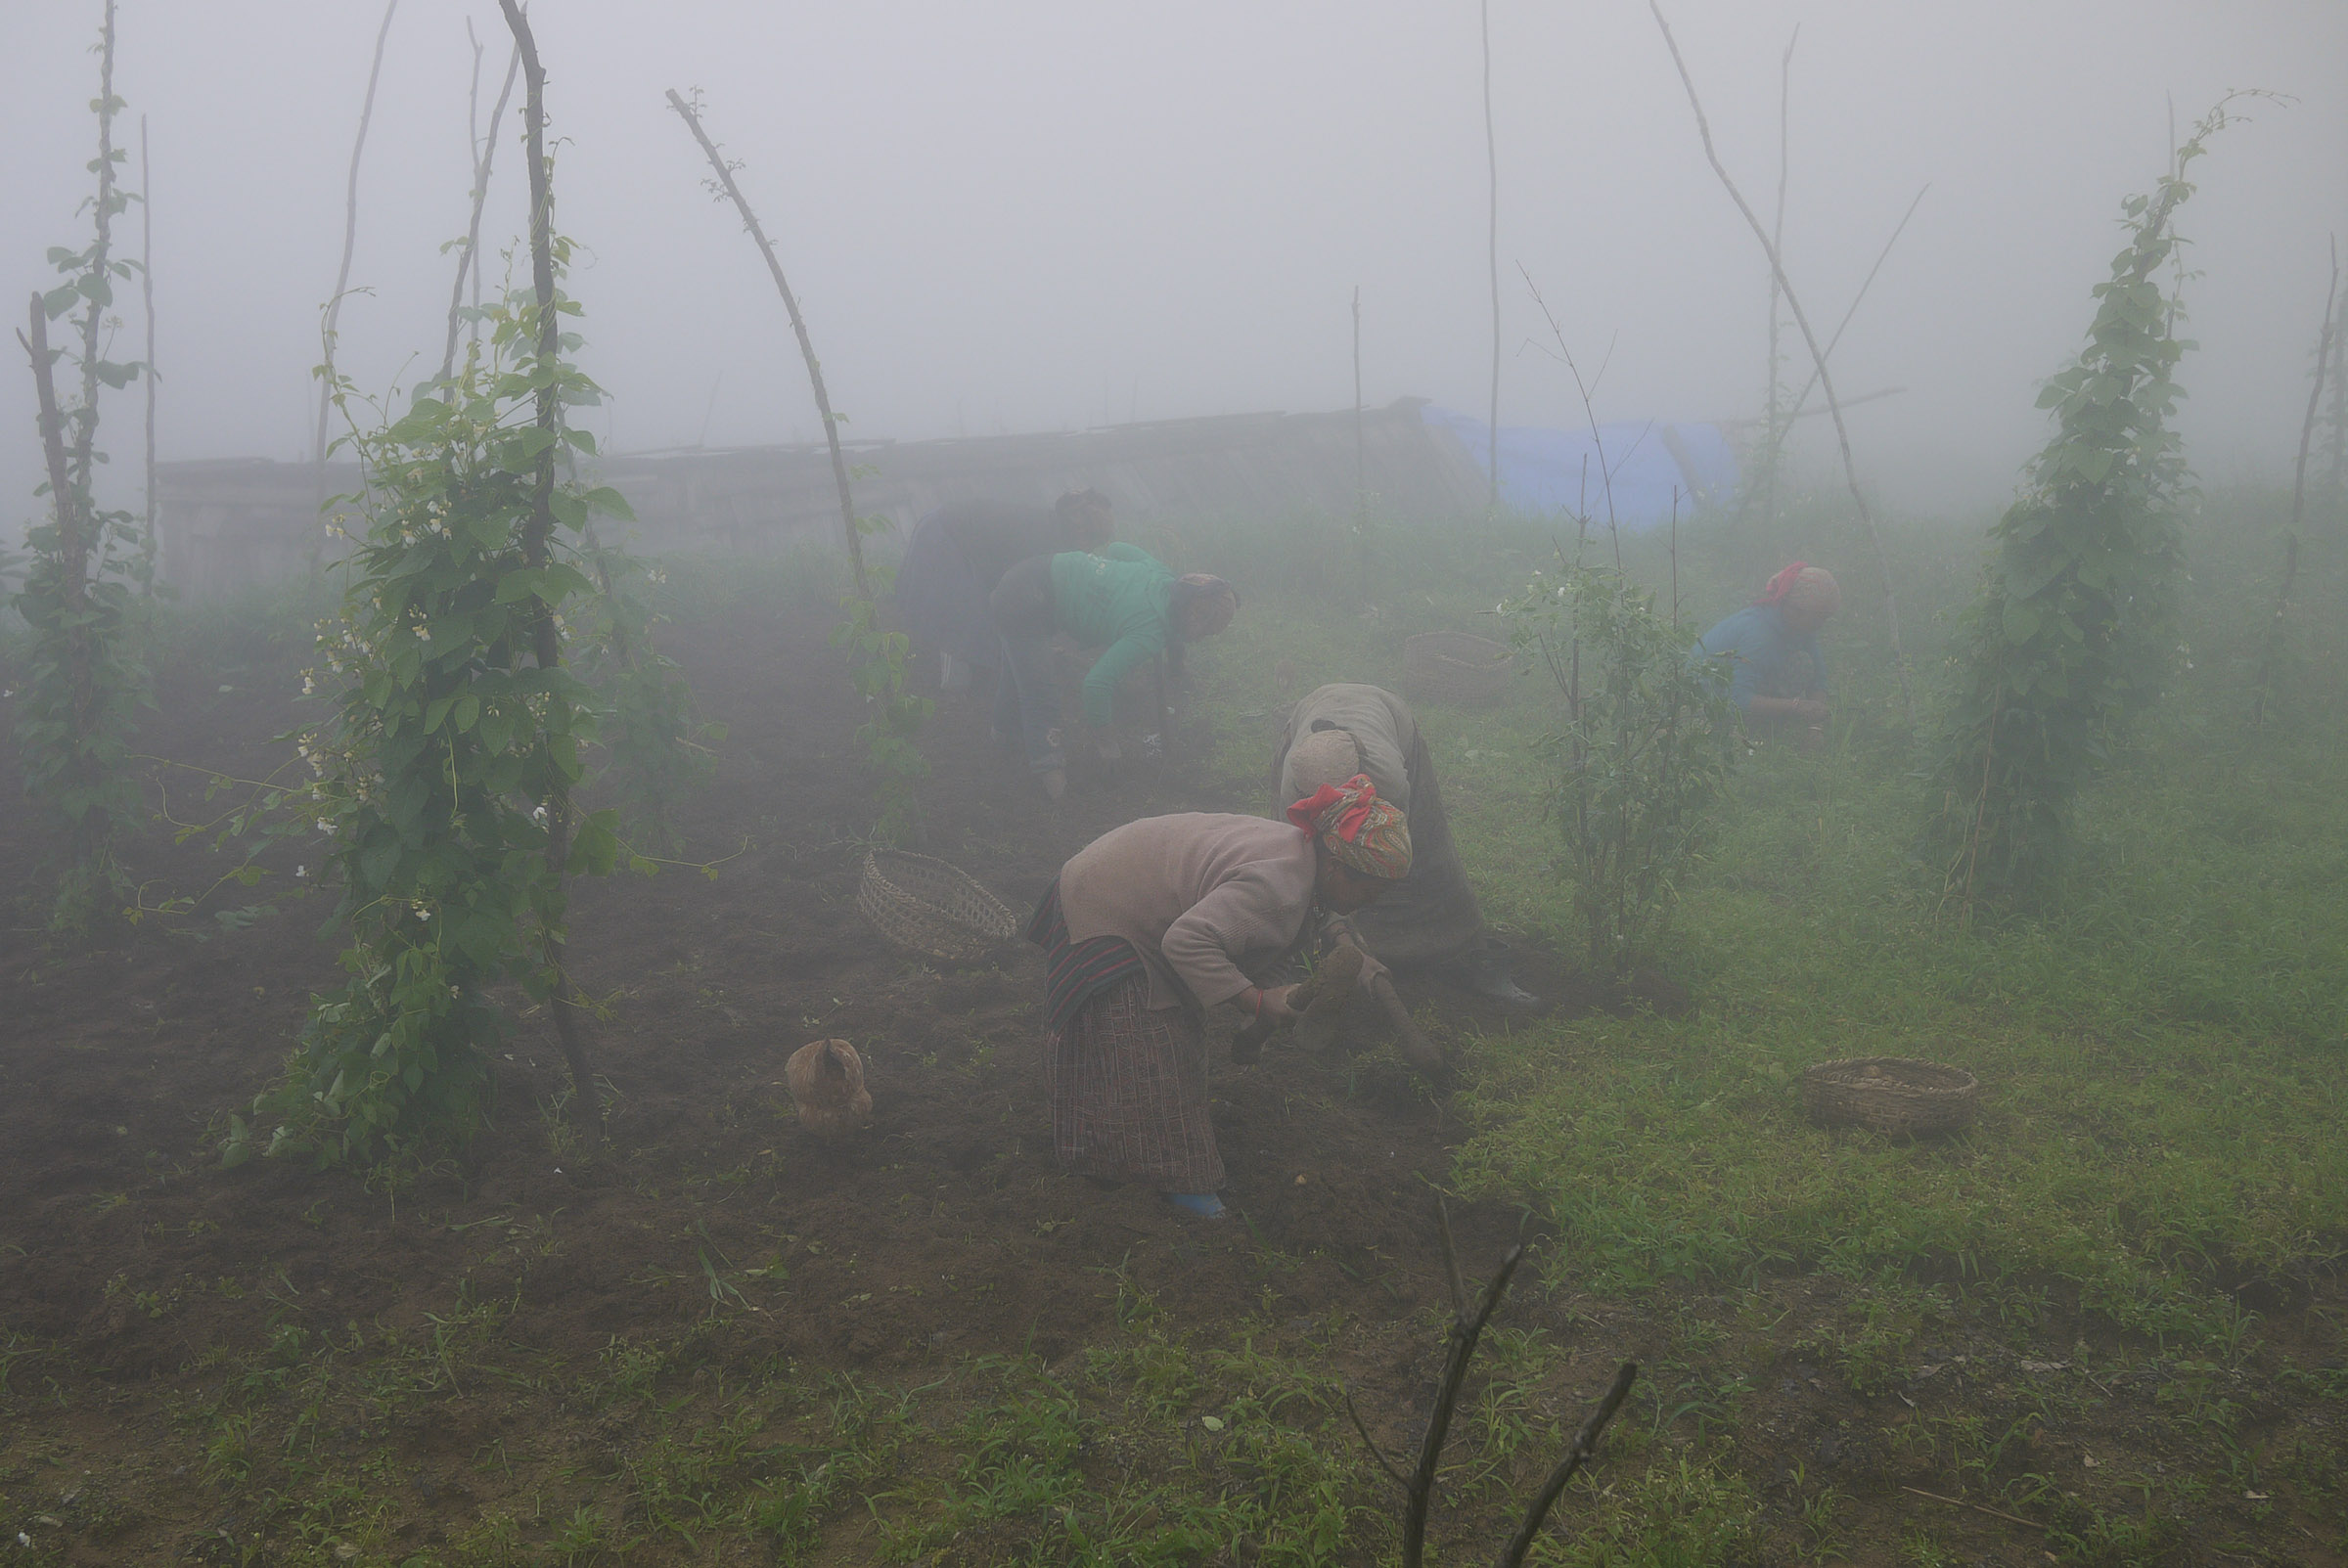 A group of Sherpa women work in a foggy field, baskets of potatoes next to them.